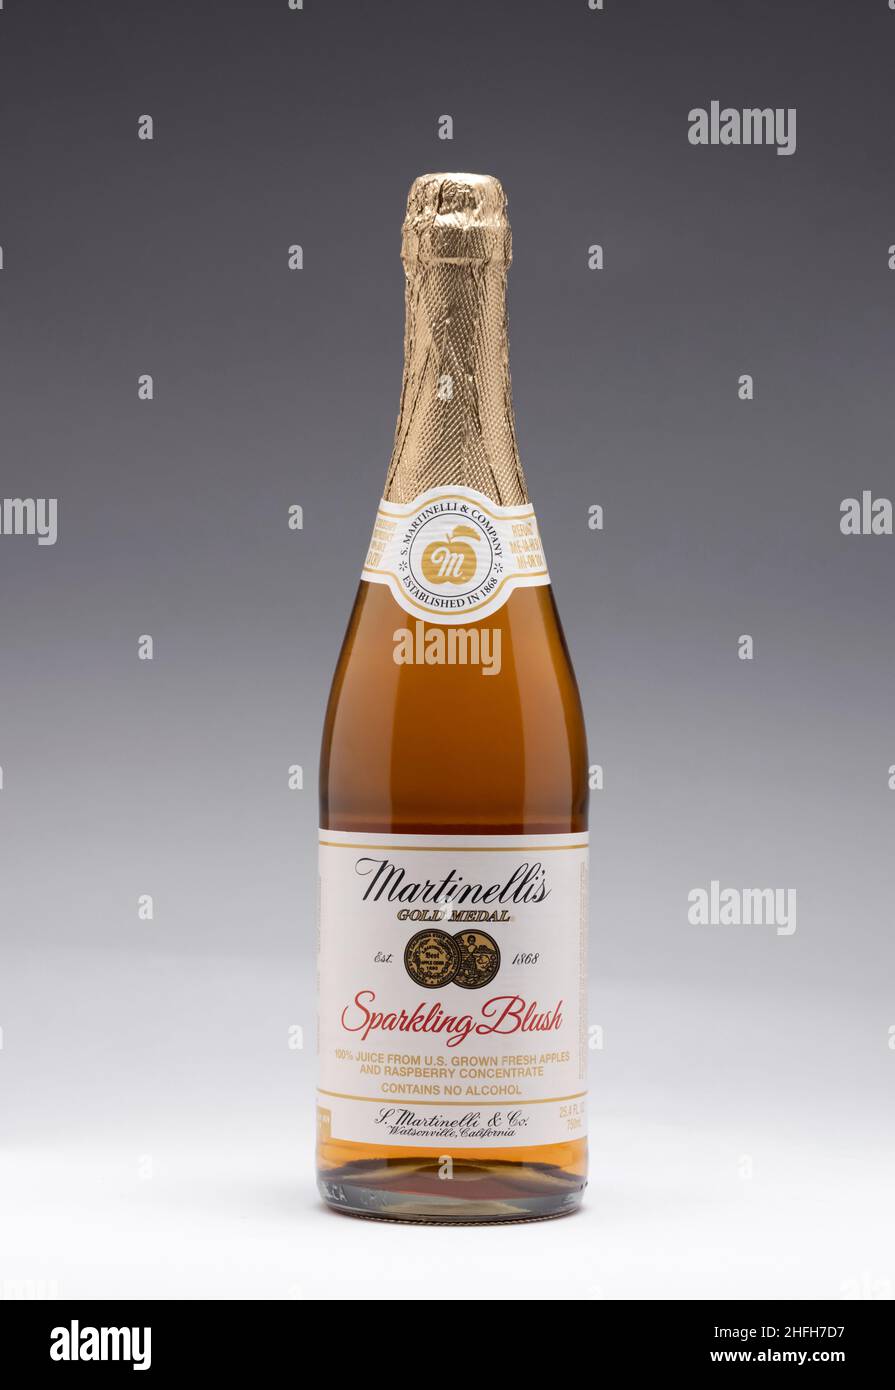 bottle of Martinelli's sparkling apple cider or juice, frequently used as a non-alcoholic substitute for champagne, on a gray background with copy spa Stock Photo